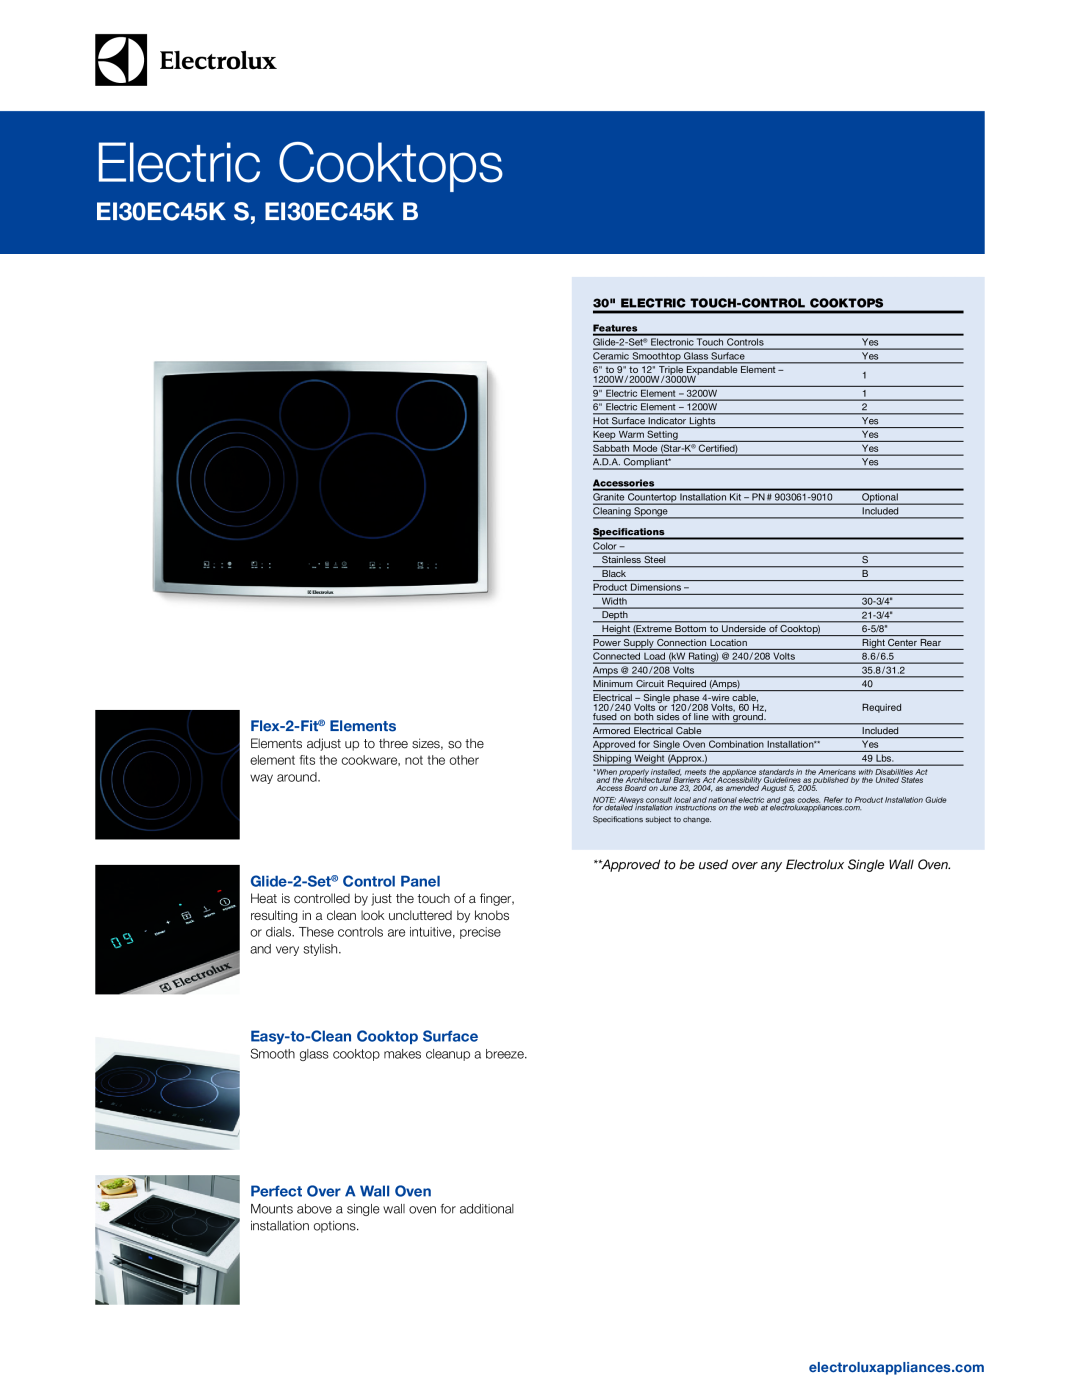 Electrolux E130EC45K S specifications Flex-2-Fit Elements, Glide-2-Set Control Panel, Easy-to-Clean Cooktop Surface 